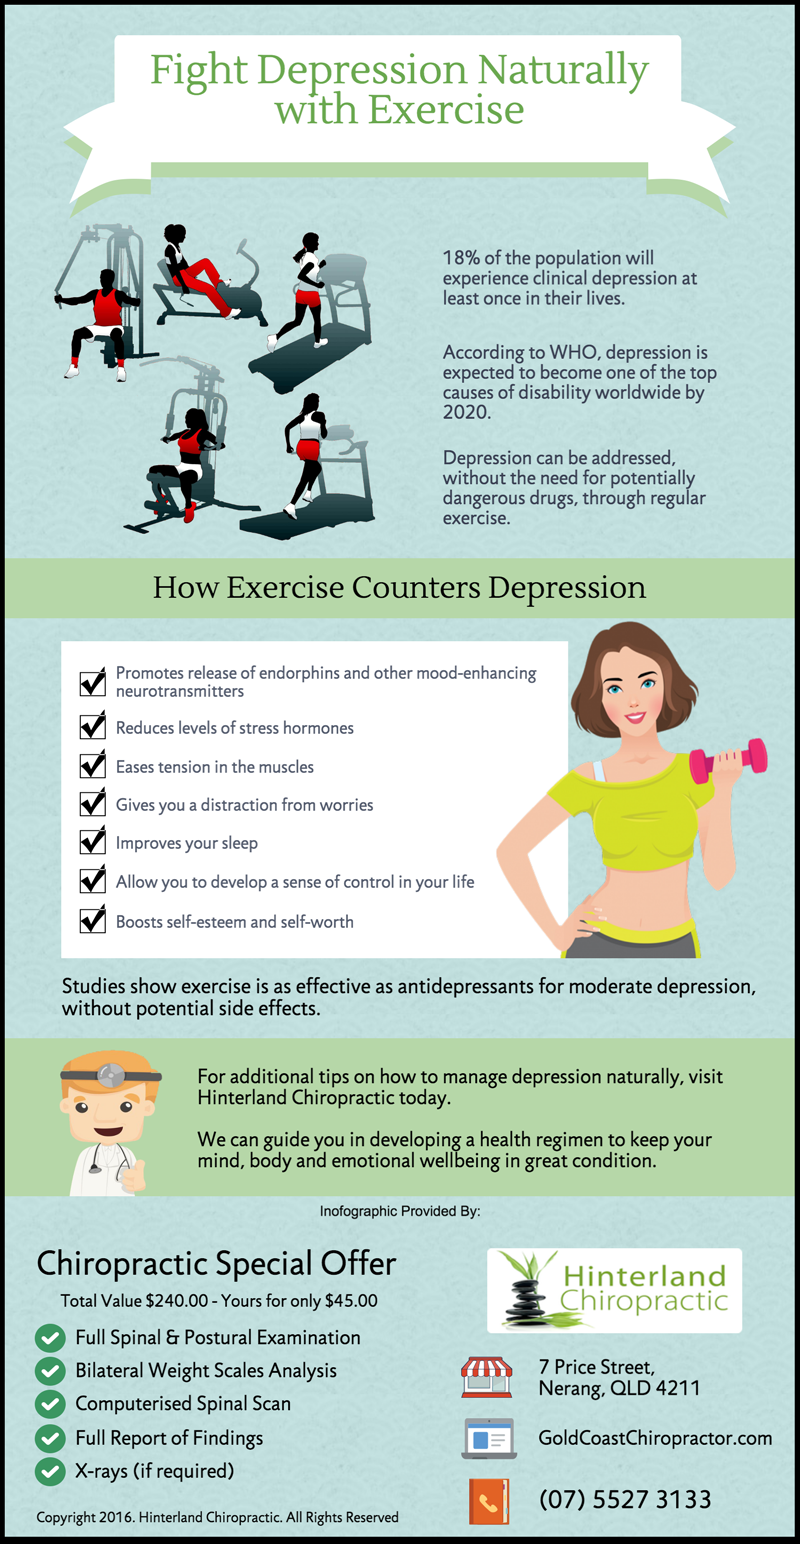 Fight Depression Naturally with Exercise